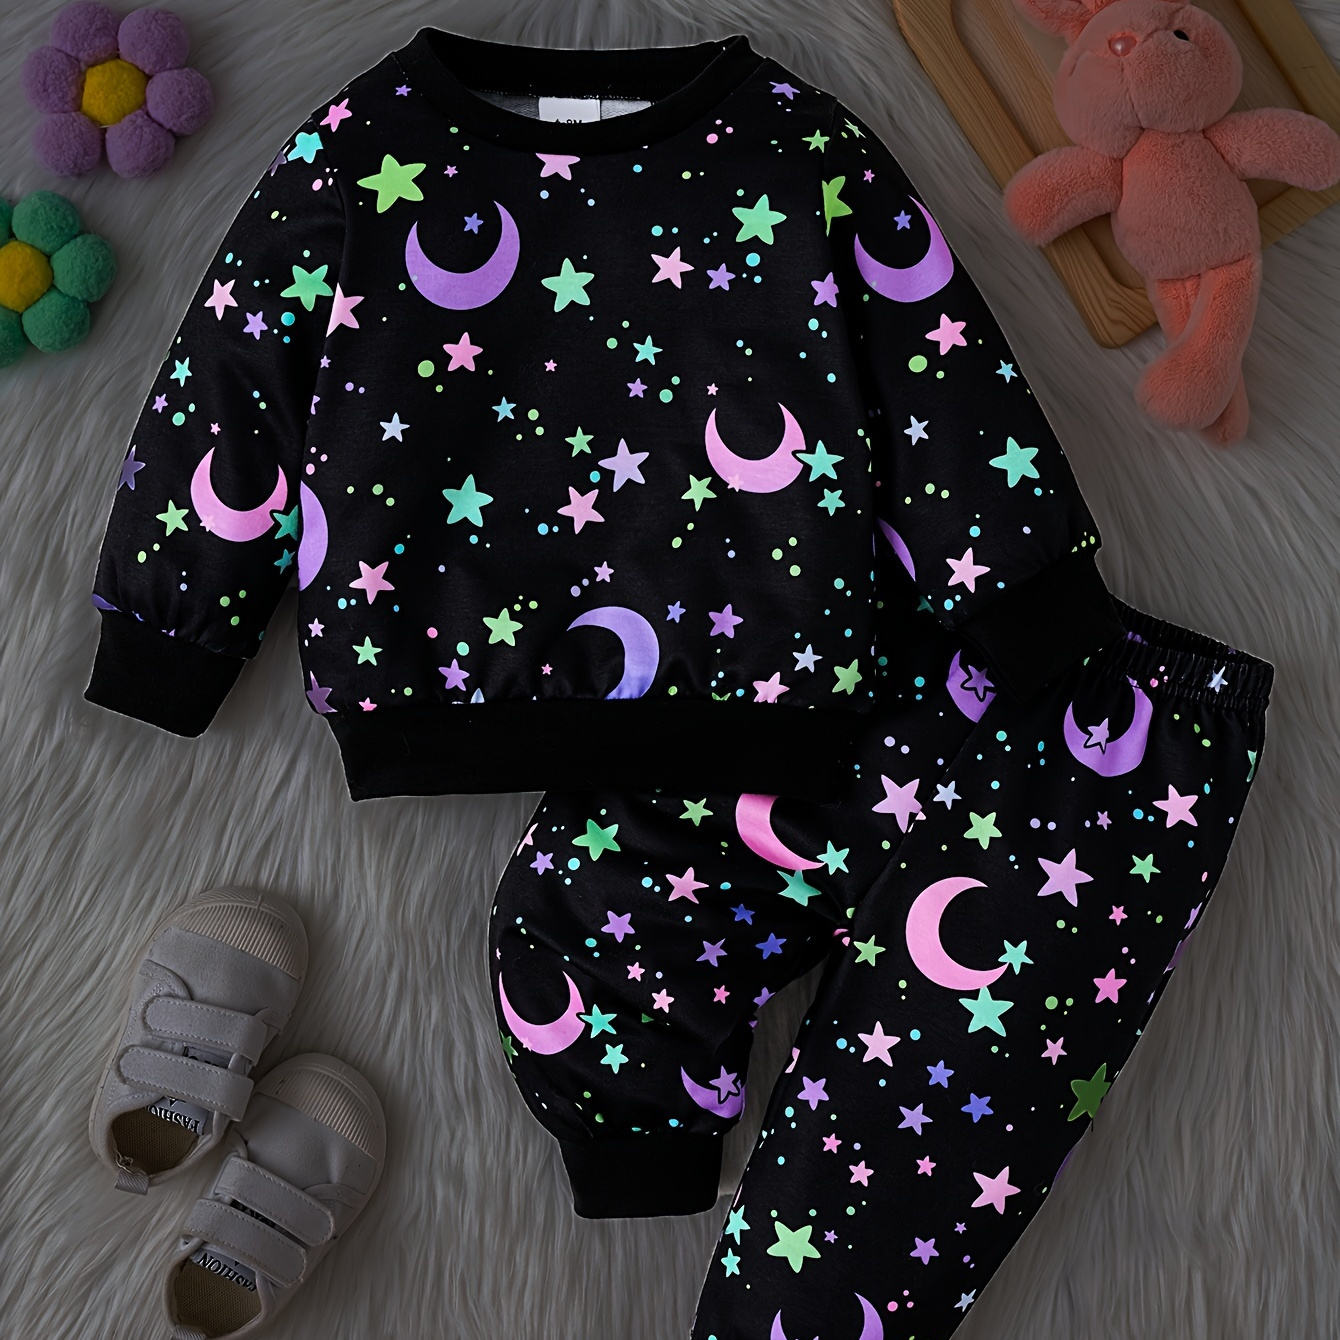 

Baby Fluorescent Pattern Trendy Sweatshirts And Sweatpants Set, Kid's Party Hang Out Casual Clothes